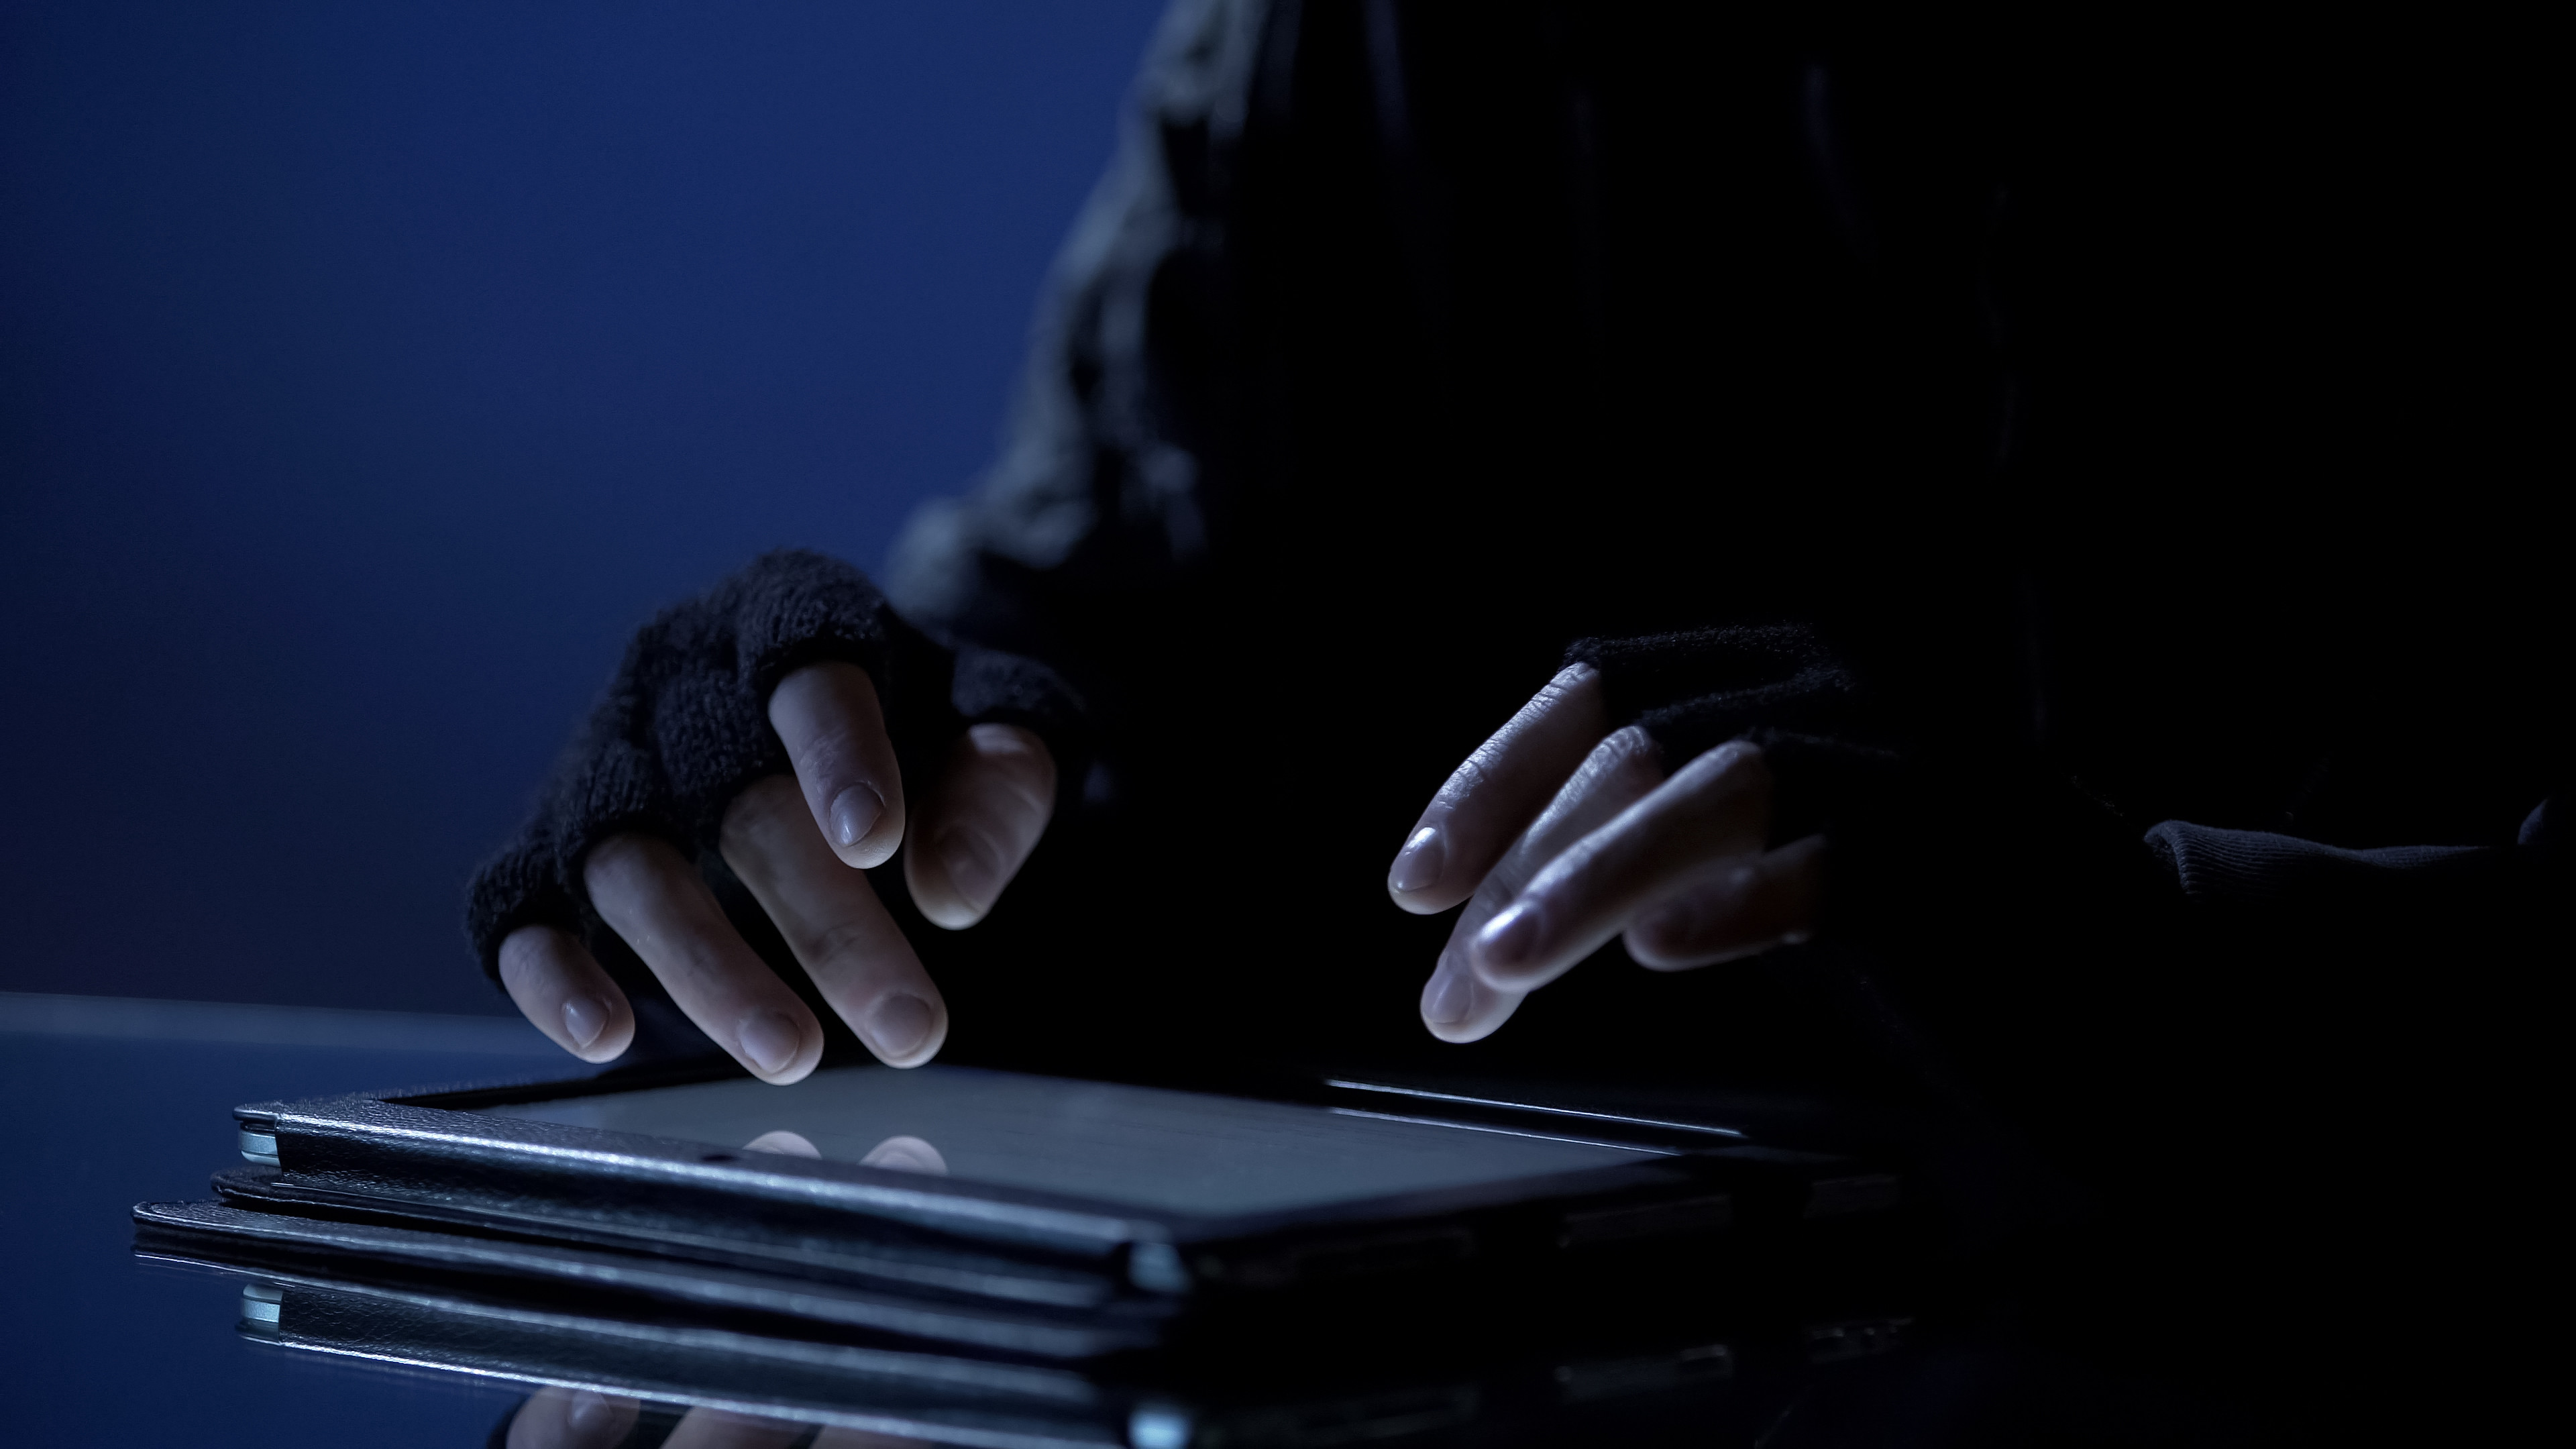 A source has said the phony email used in the scam matched one used by a supplier. Photo: Shutterstock